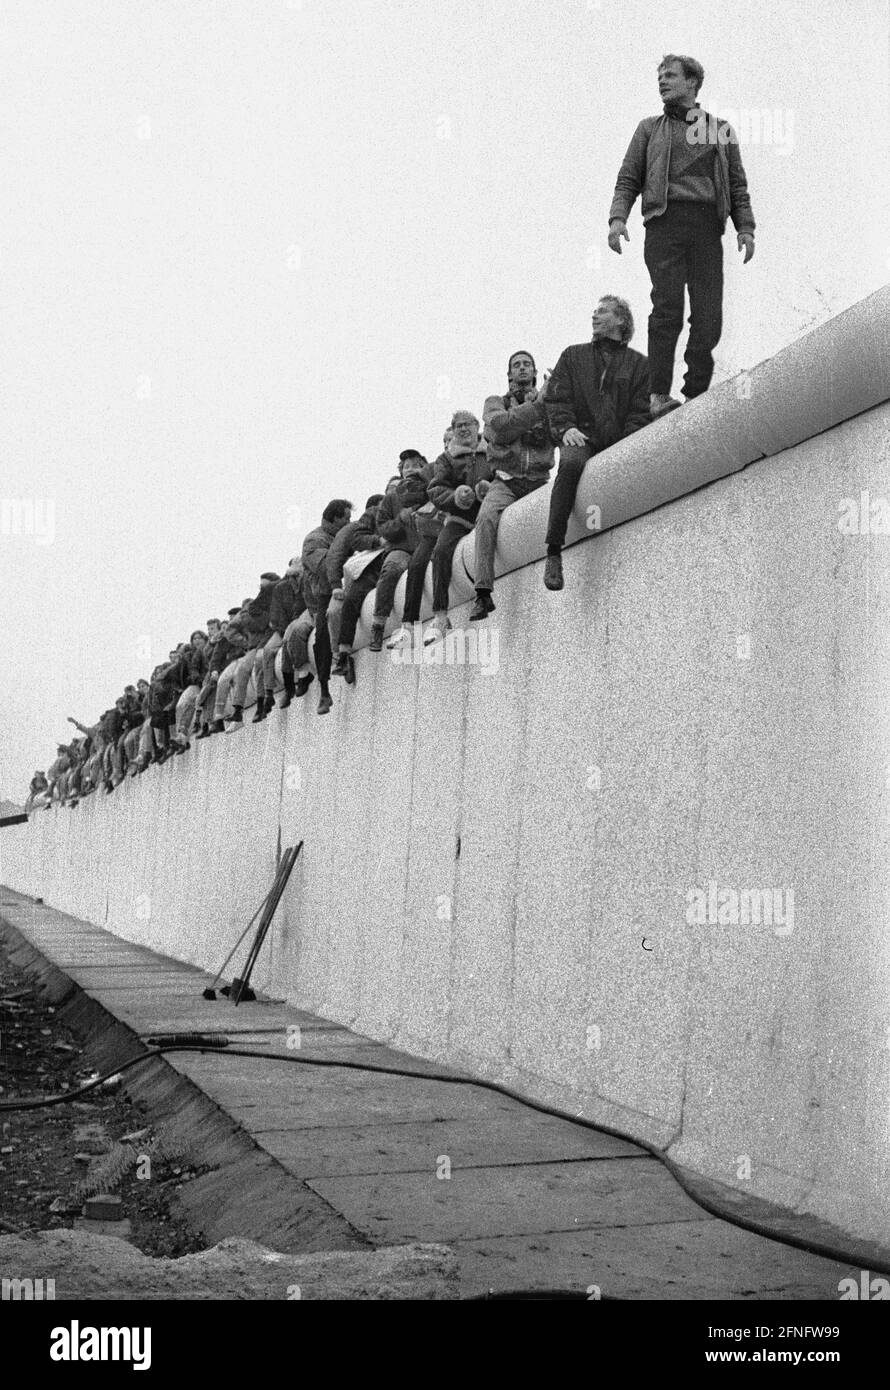 Berlin-City / Mitte / GDR / Berlin Wall 12.11.1989 Potsdamer Platz. The Wall is torn down by GDR border guards from a Stasi unit. Berliners have climbed onto the Wall to get a better view. // Unification / People's Army / GDR border guards / History / Communism / Tiergarten [automated translation] Stock Photo